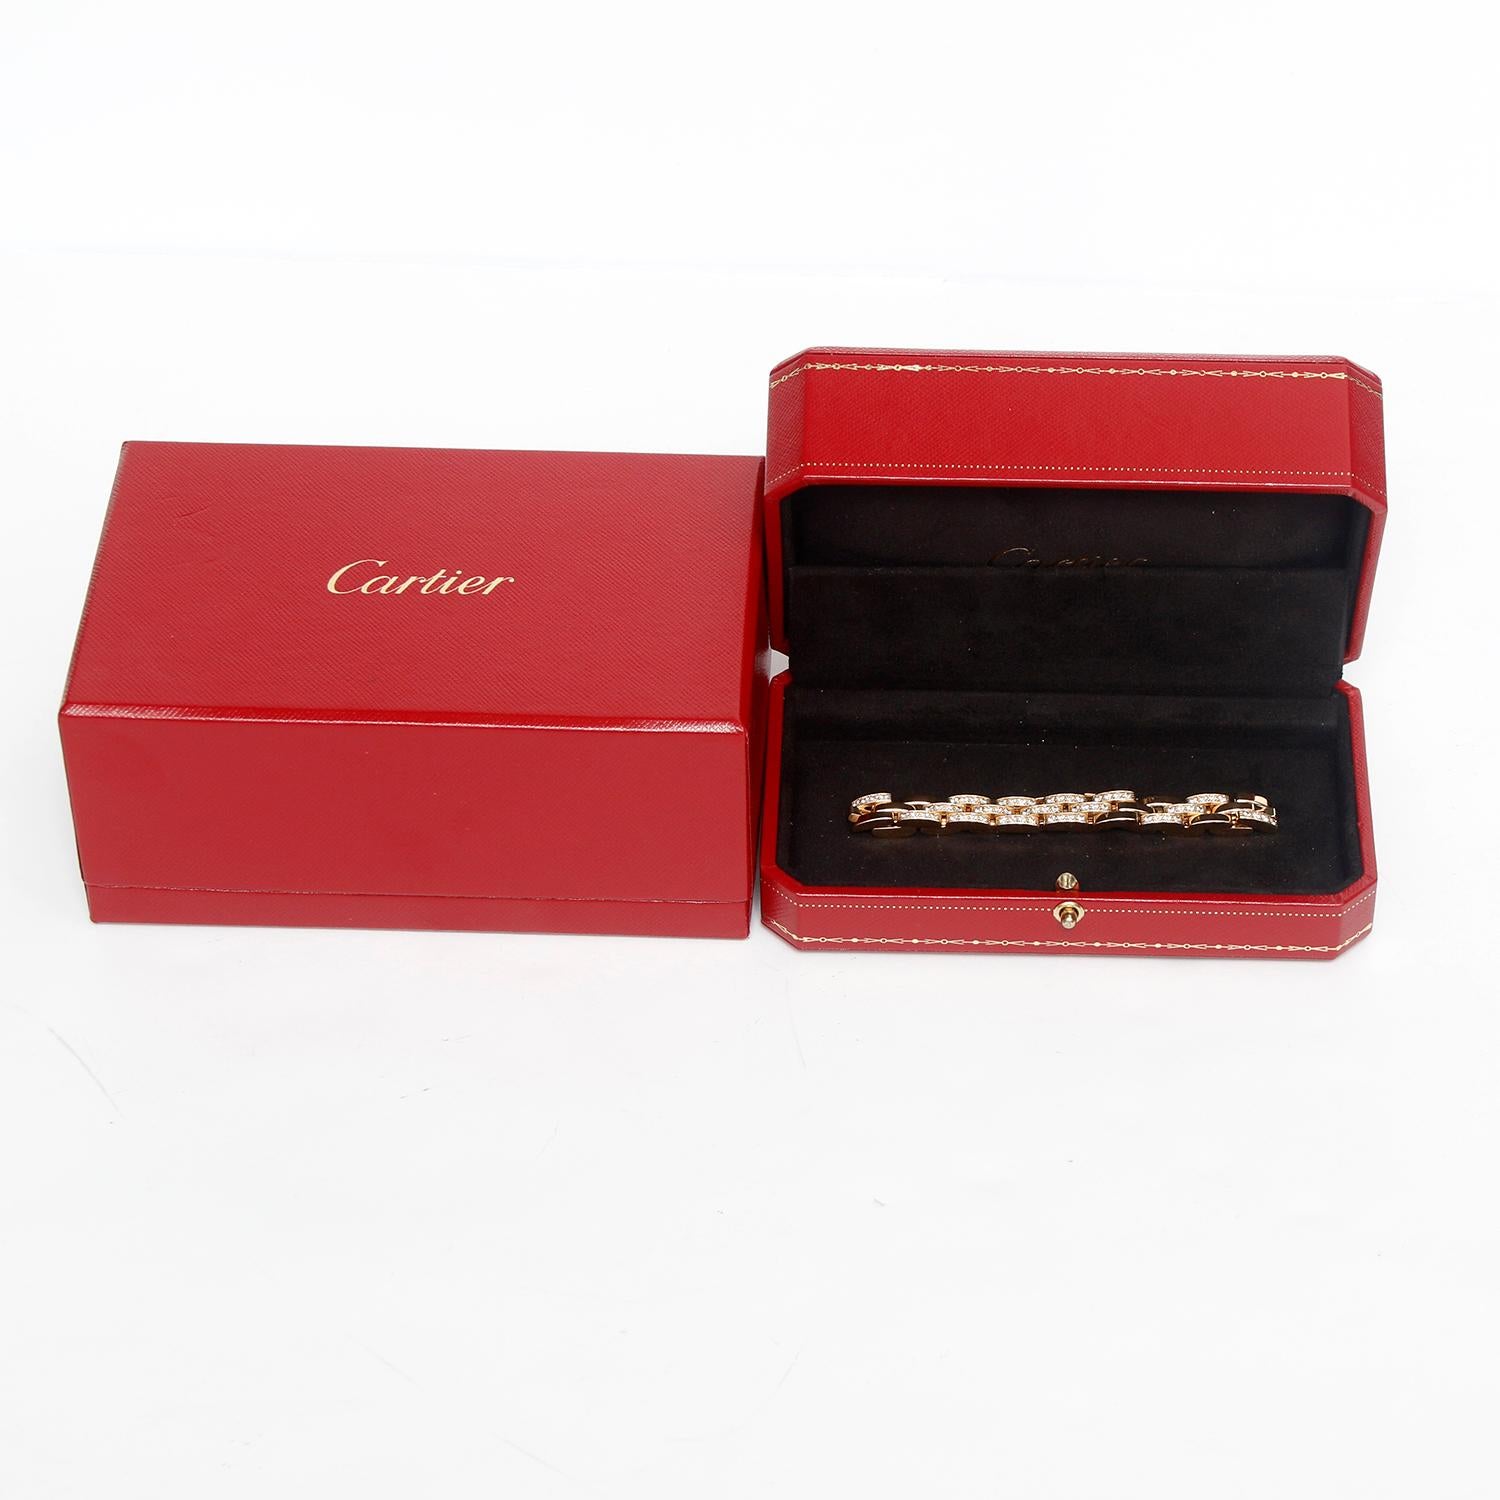 Cartier Maillon Panthere Diamond Link Bracelet - This stylish diamond link bracelet by Cartier is fashioned in high polish 18 karat yellow gold. The three row Panthere bracelet features 3.00 carats of high quality round brilliant cut diamonds.